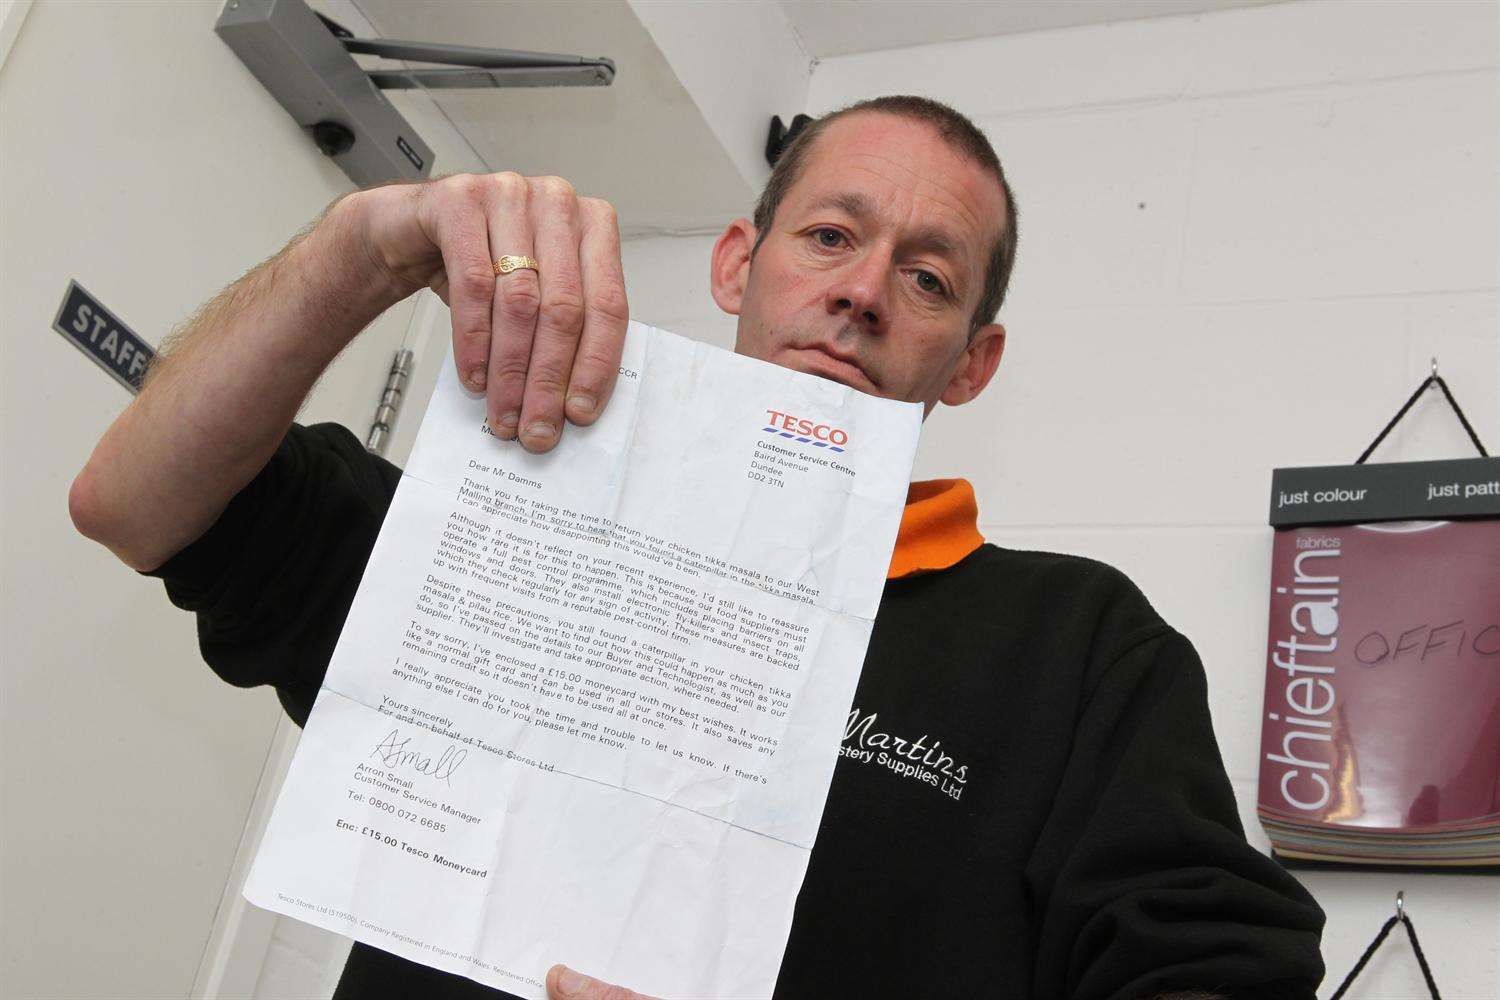 In a letter, Tesco said it would pay Mr Damms £15. Picture: John Westhrop